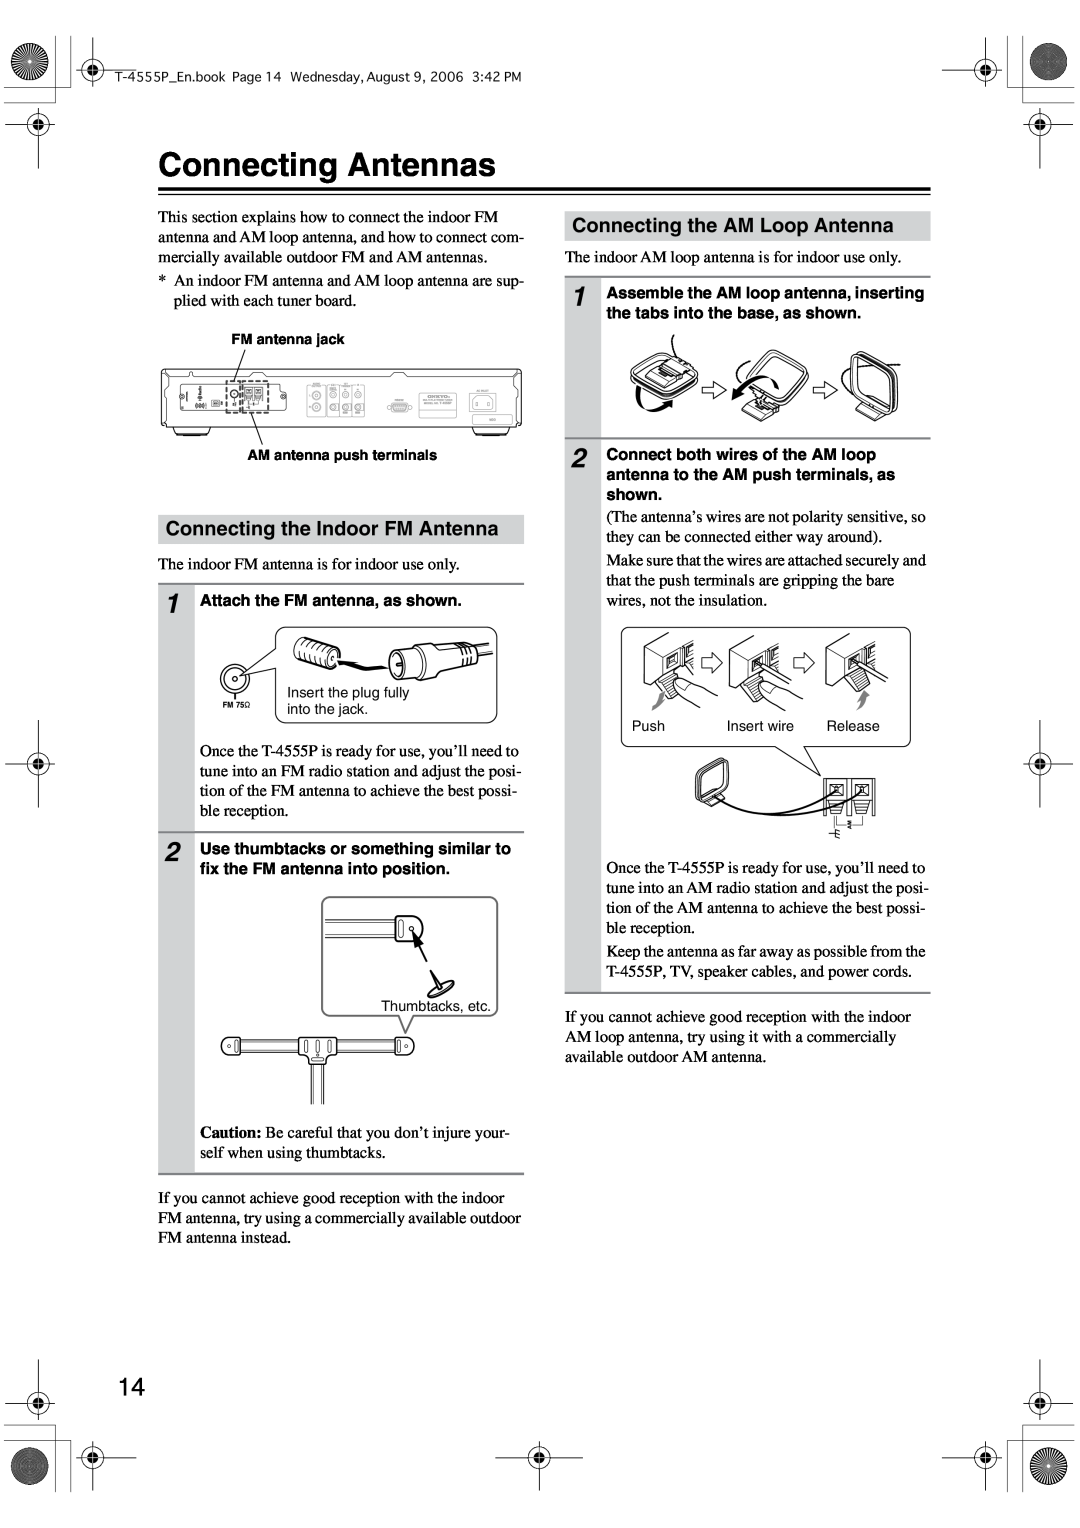 Onkyo T-4555P instruction manual Connecting Antennas, Connecting the AM Loop Antenna, Connecting the Indoor FM Antenna 